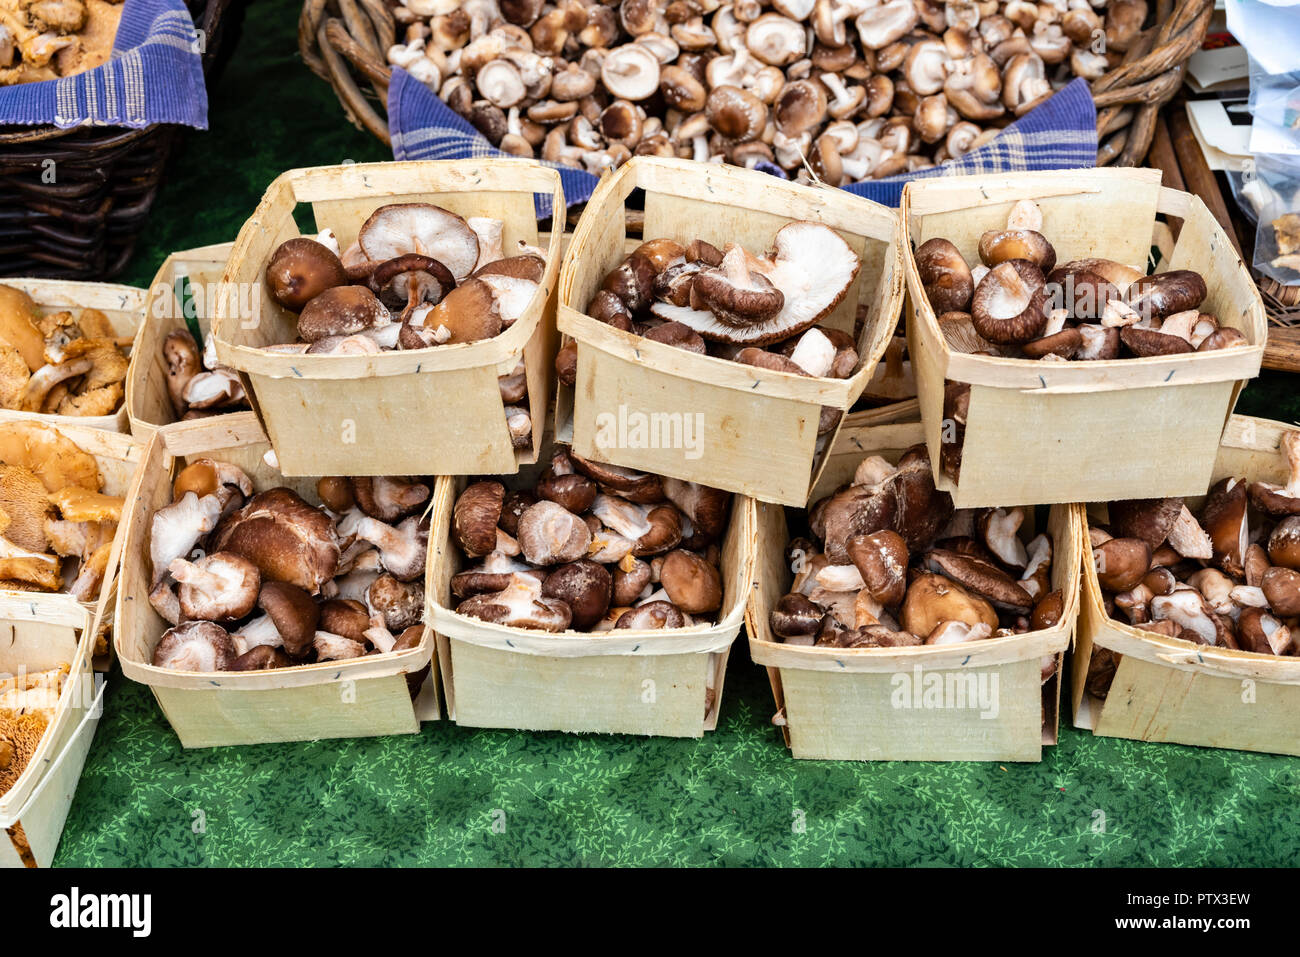 Baskets of wild harvested mushrooms on display at the farmers market Stock Photo